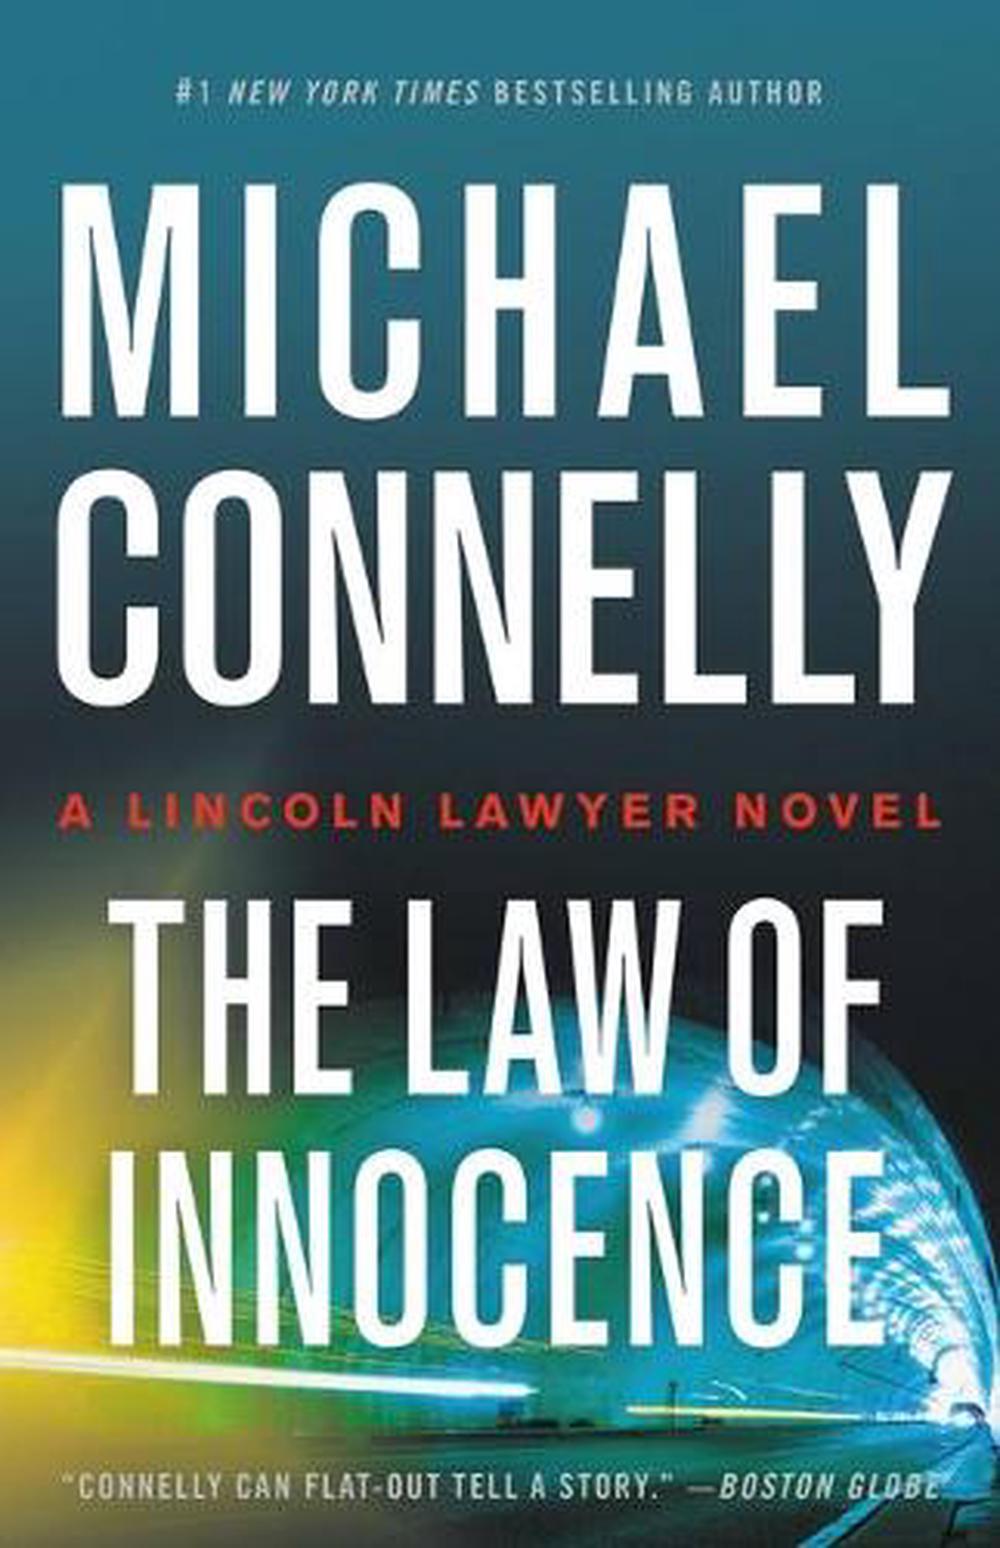 The Lincoln Lawyer Novels by Michael Connelly